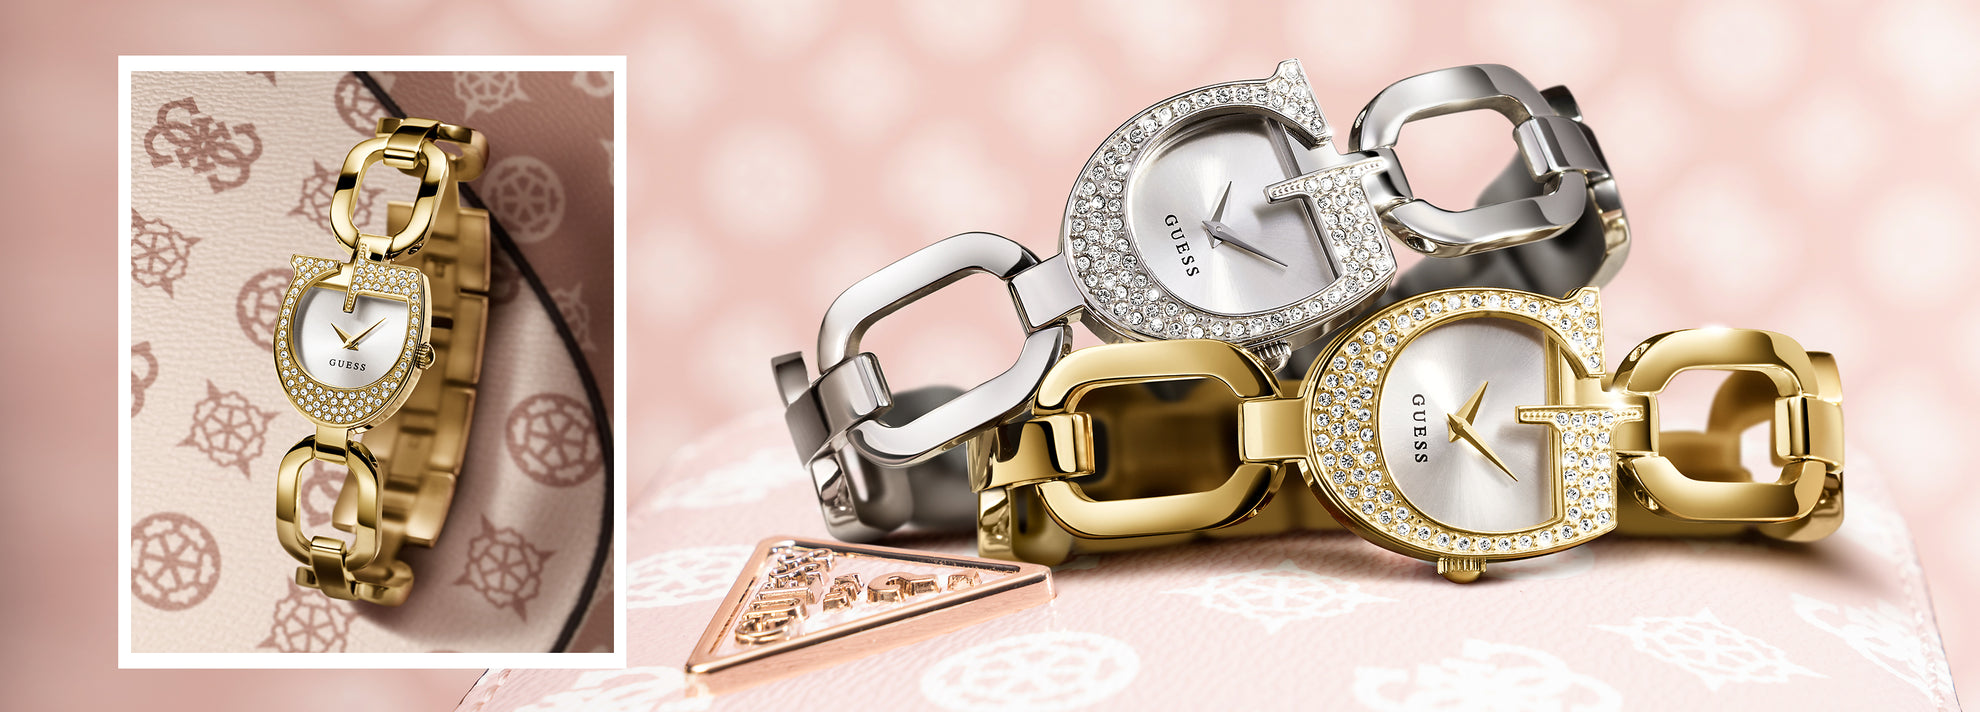 gold and silver watches on logo patterned background